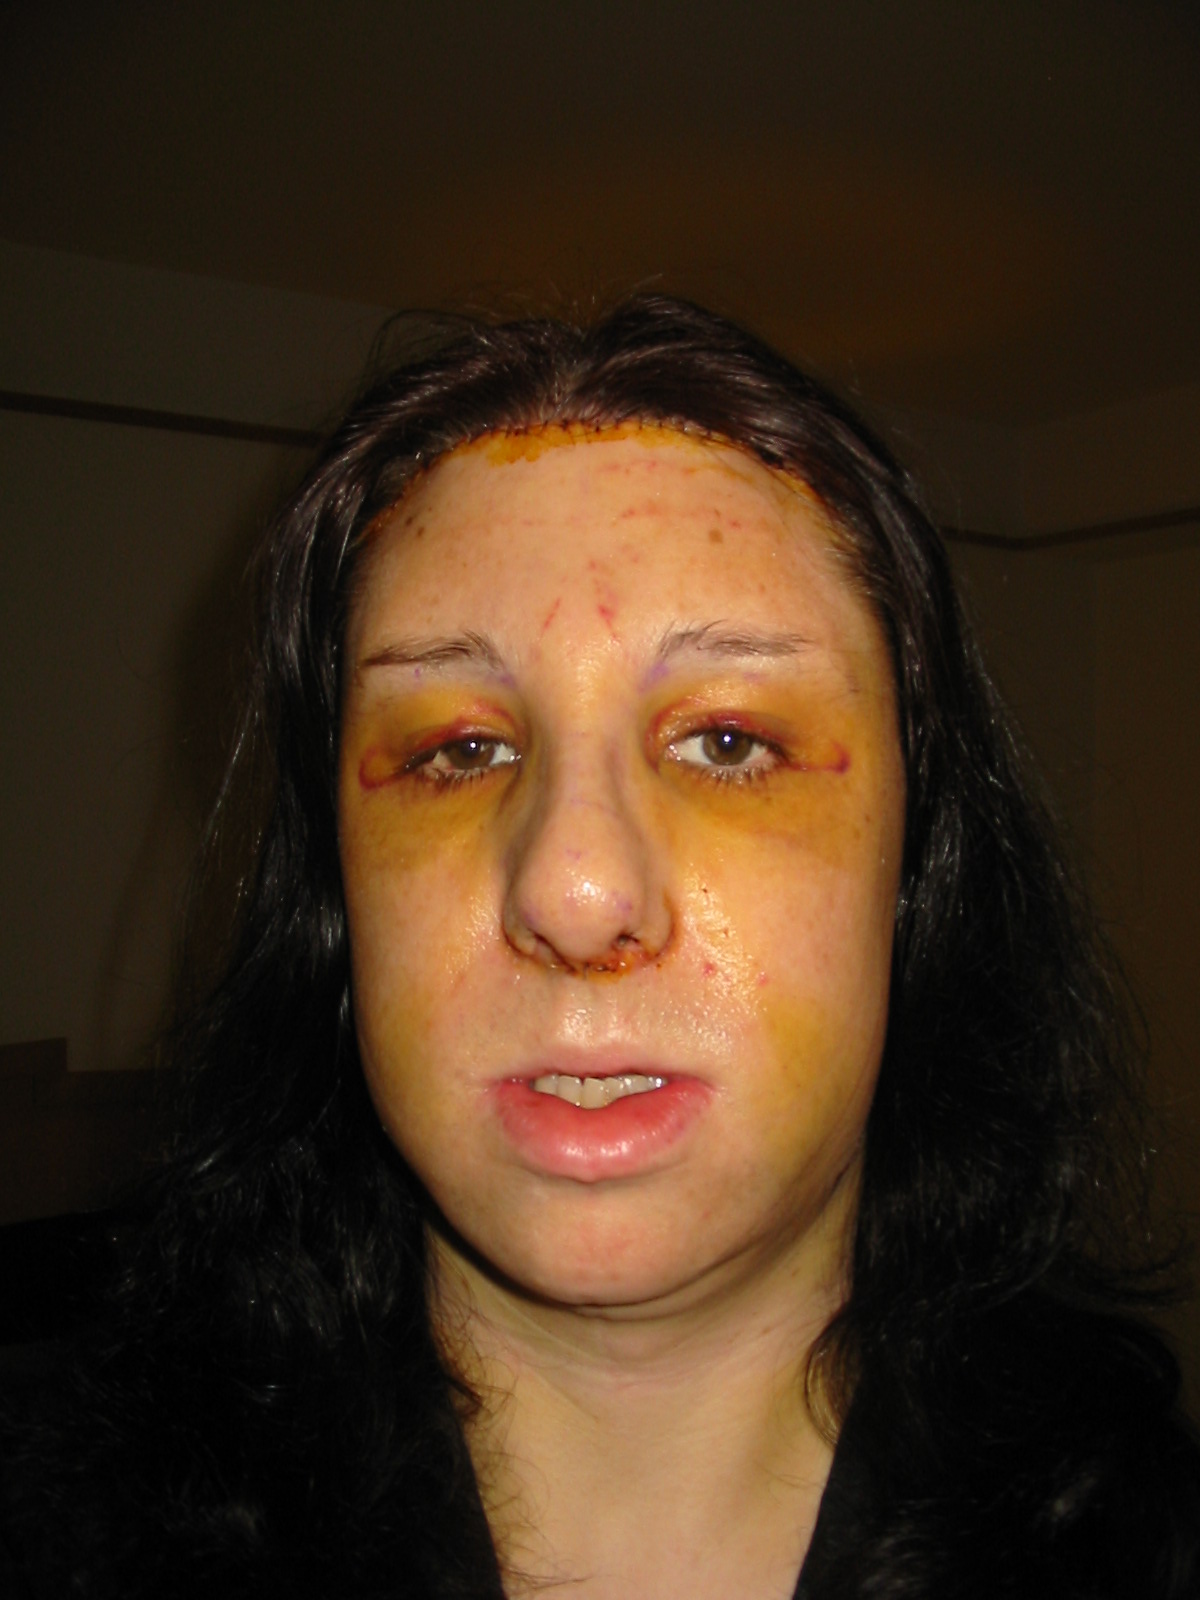 My face at 4 days post op. Although I was bruised and badly swollen, the effects of the brow lift and chin reduction are striking